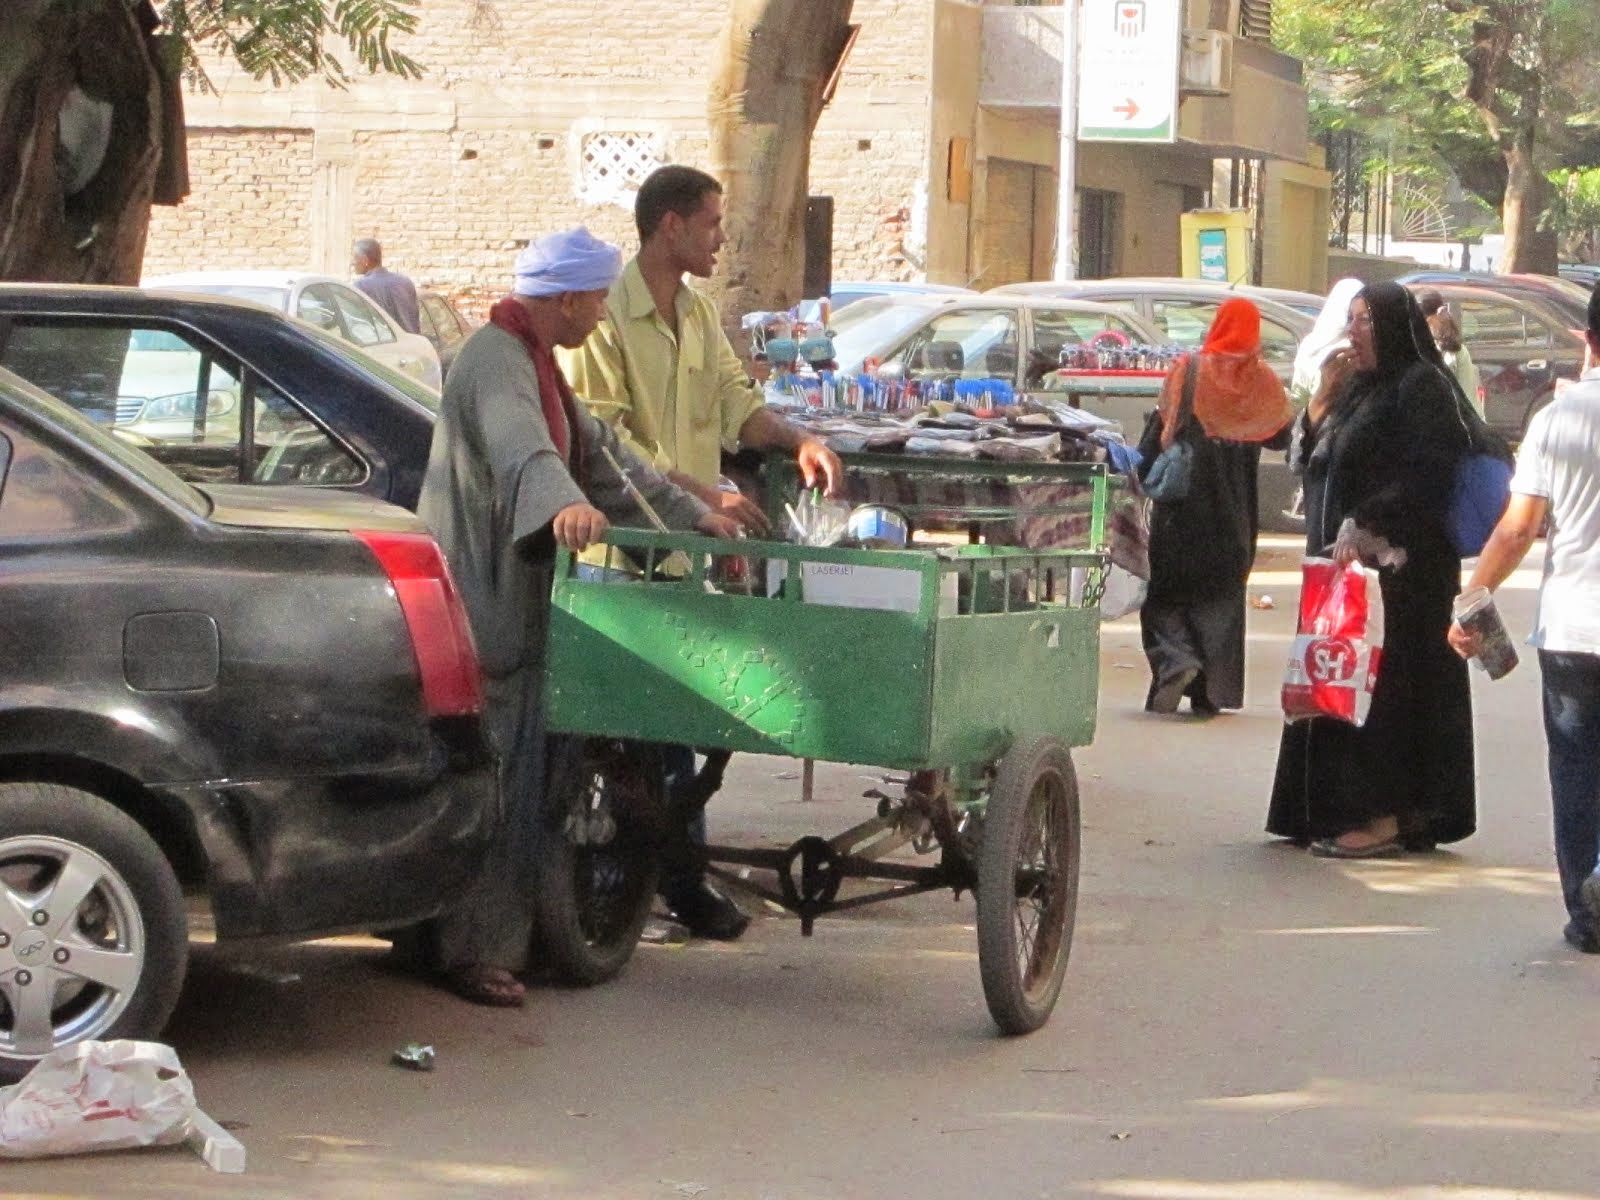 A Cool Sustainable Transport Vehicle in Cairo!